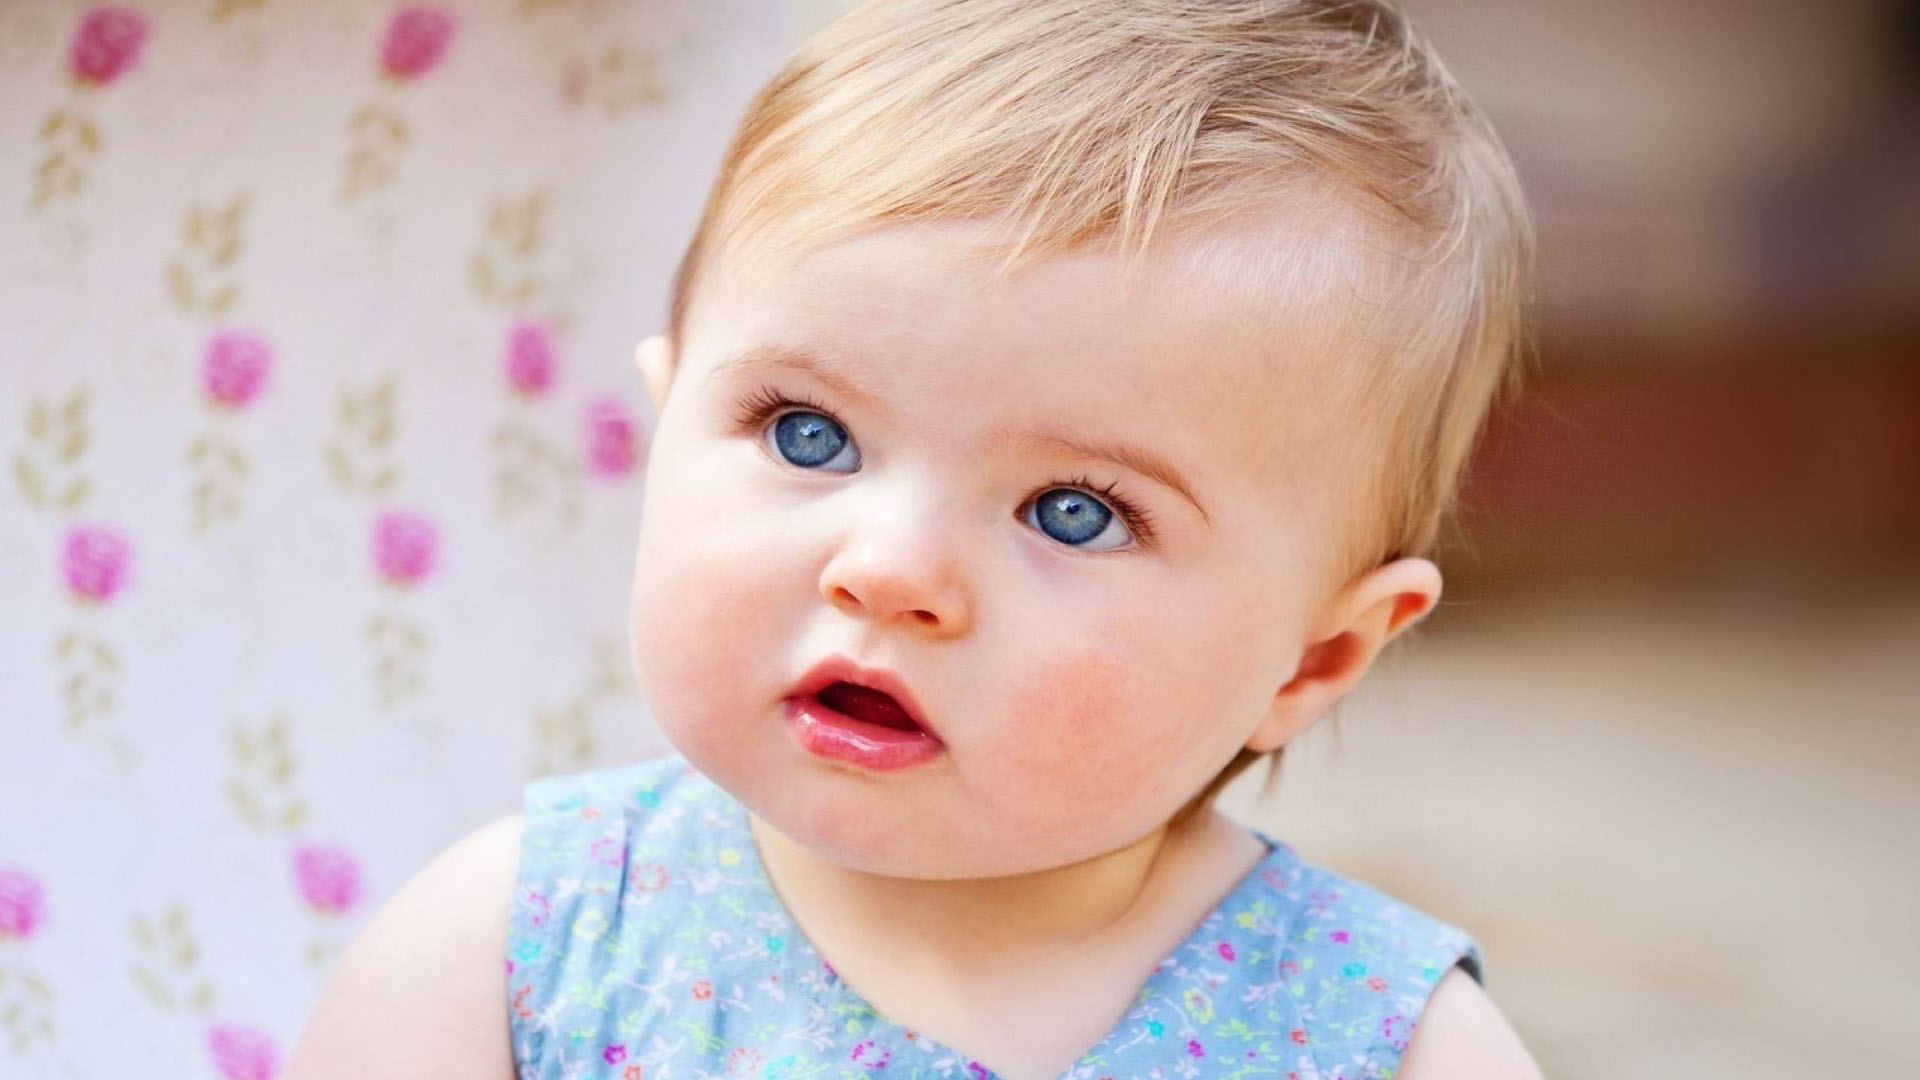 Cute Baby HD Images, Pics & Wallpapers | Cute Profile Images